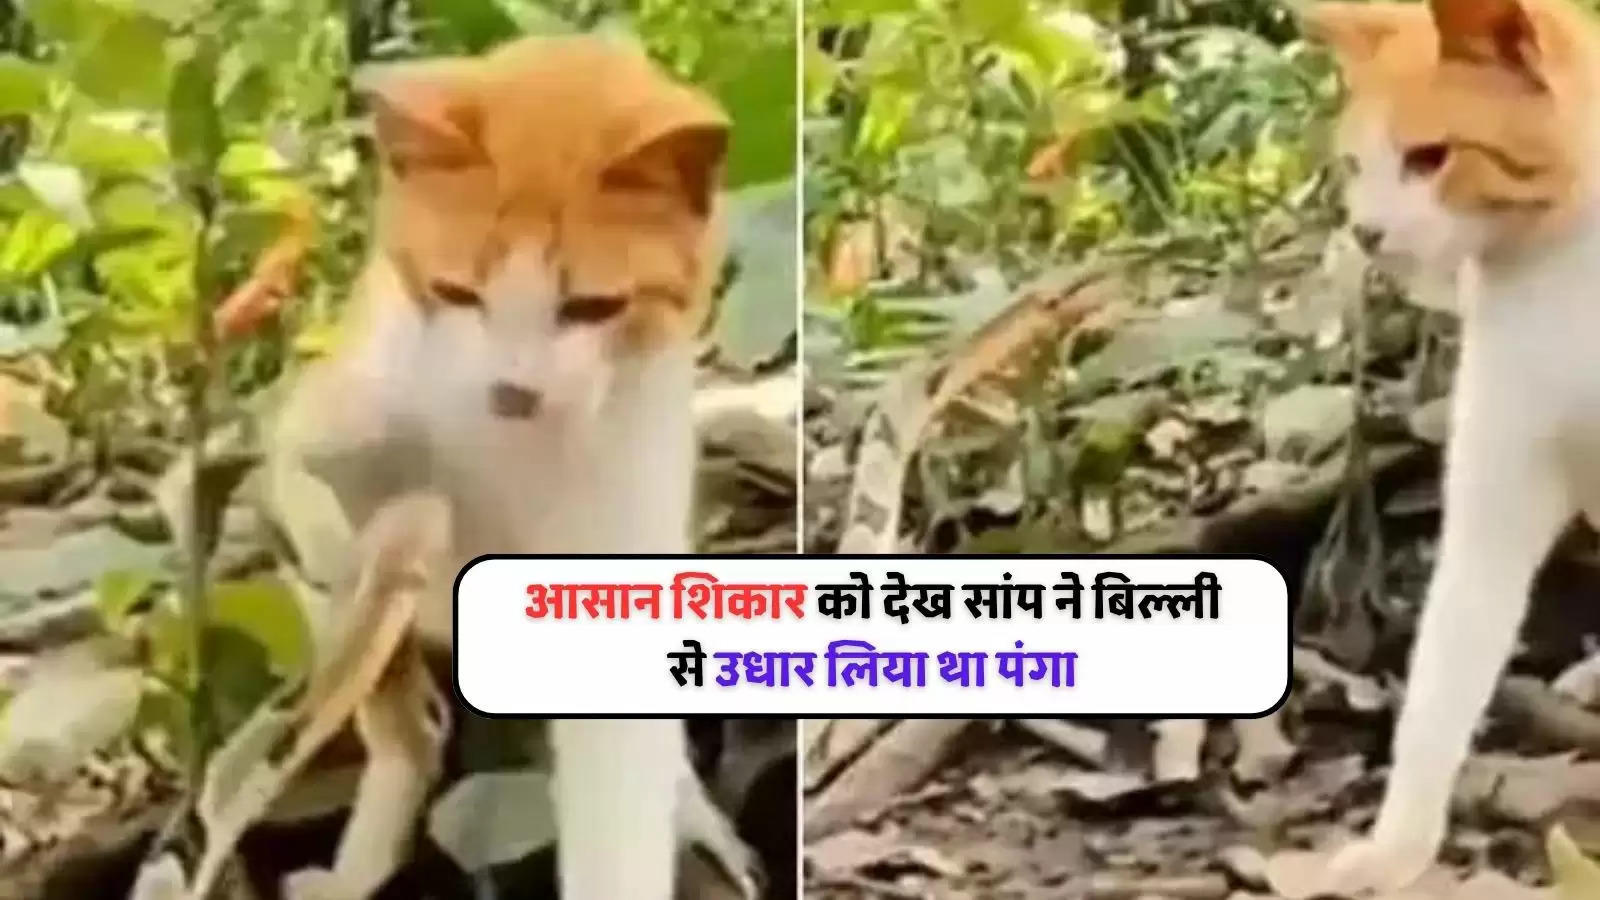 poisonous snake attacked the cat